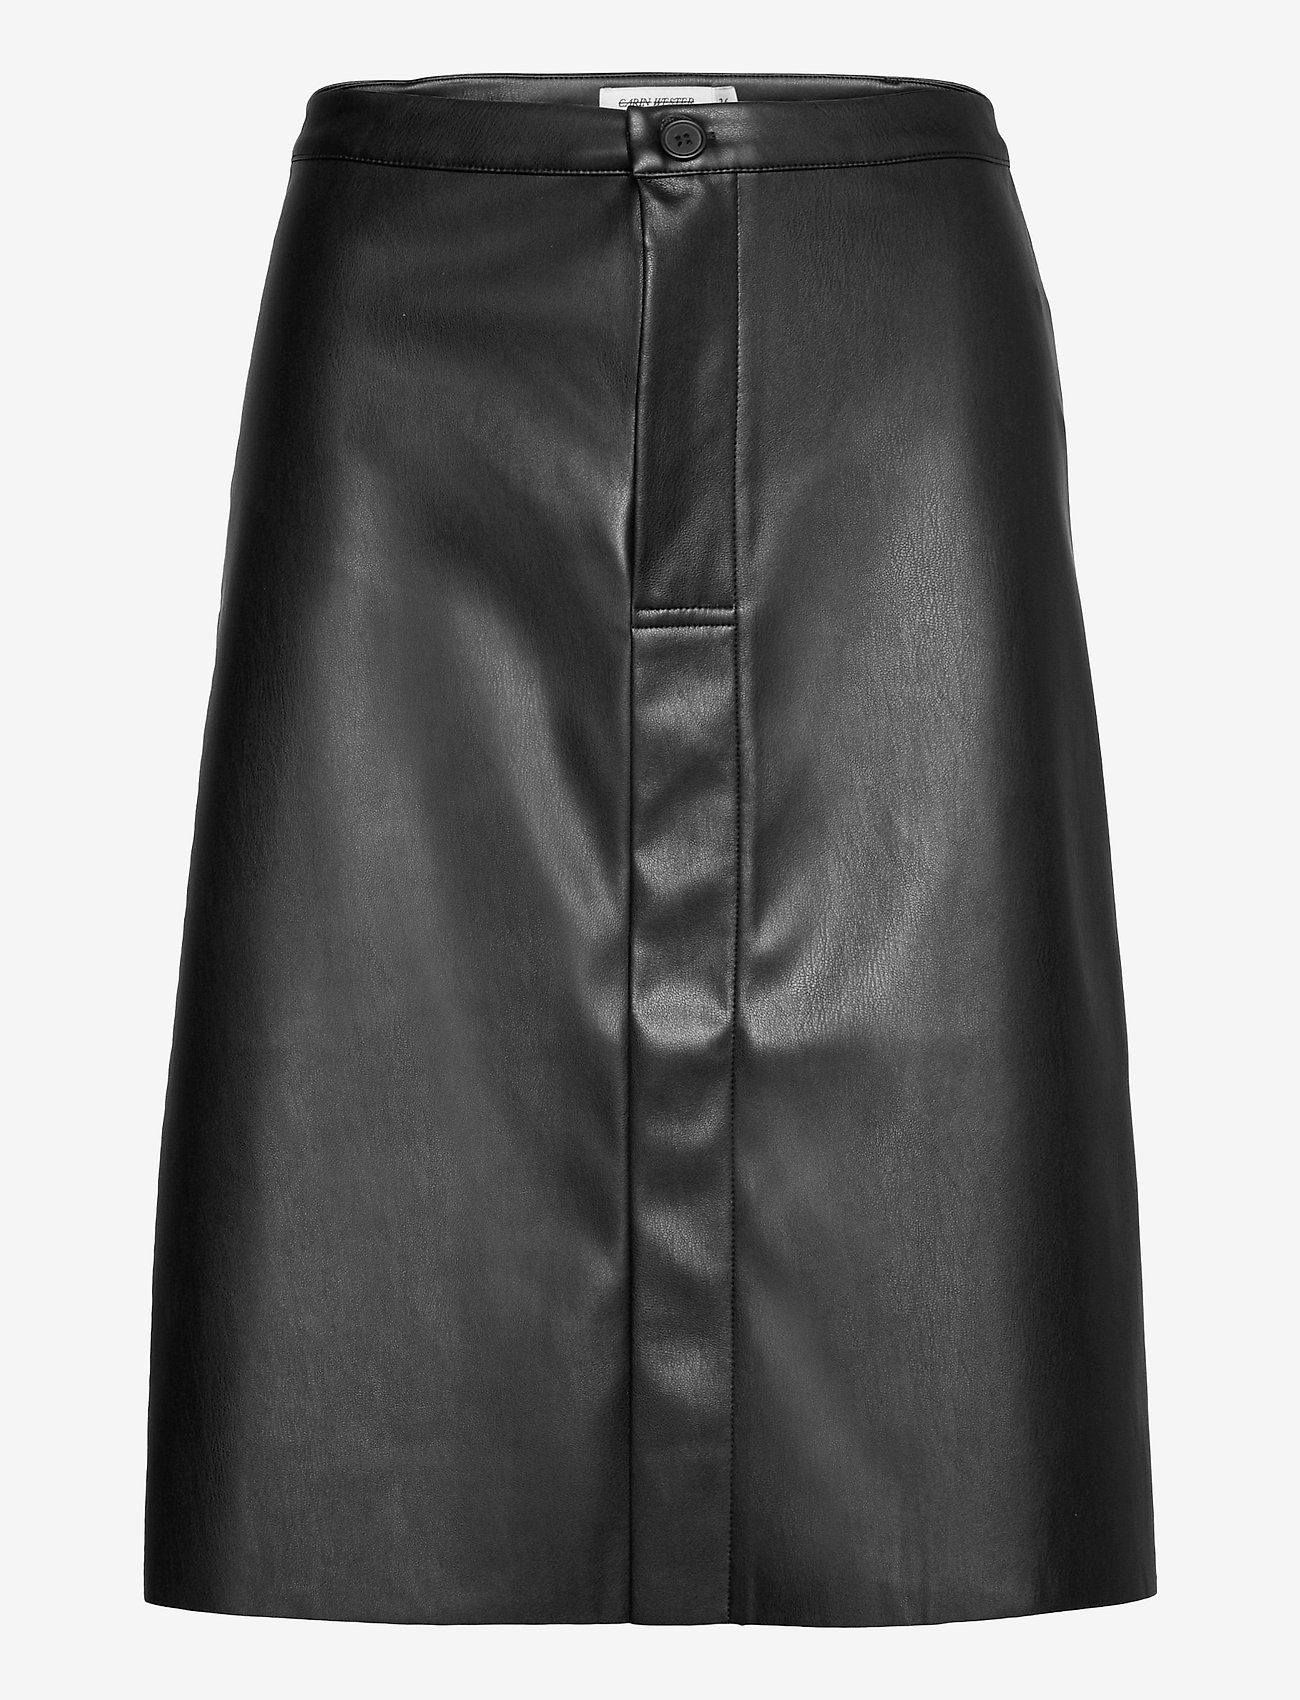 Carin Wester Rocco - Skirts | Boozt.com